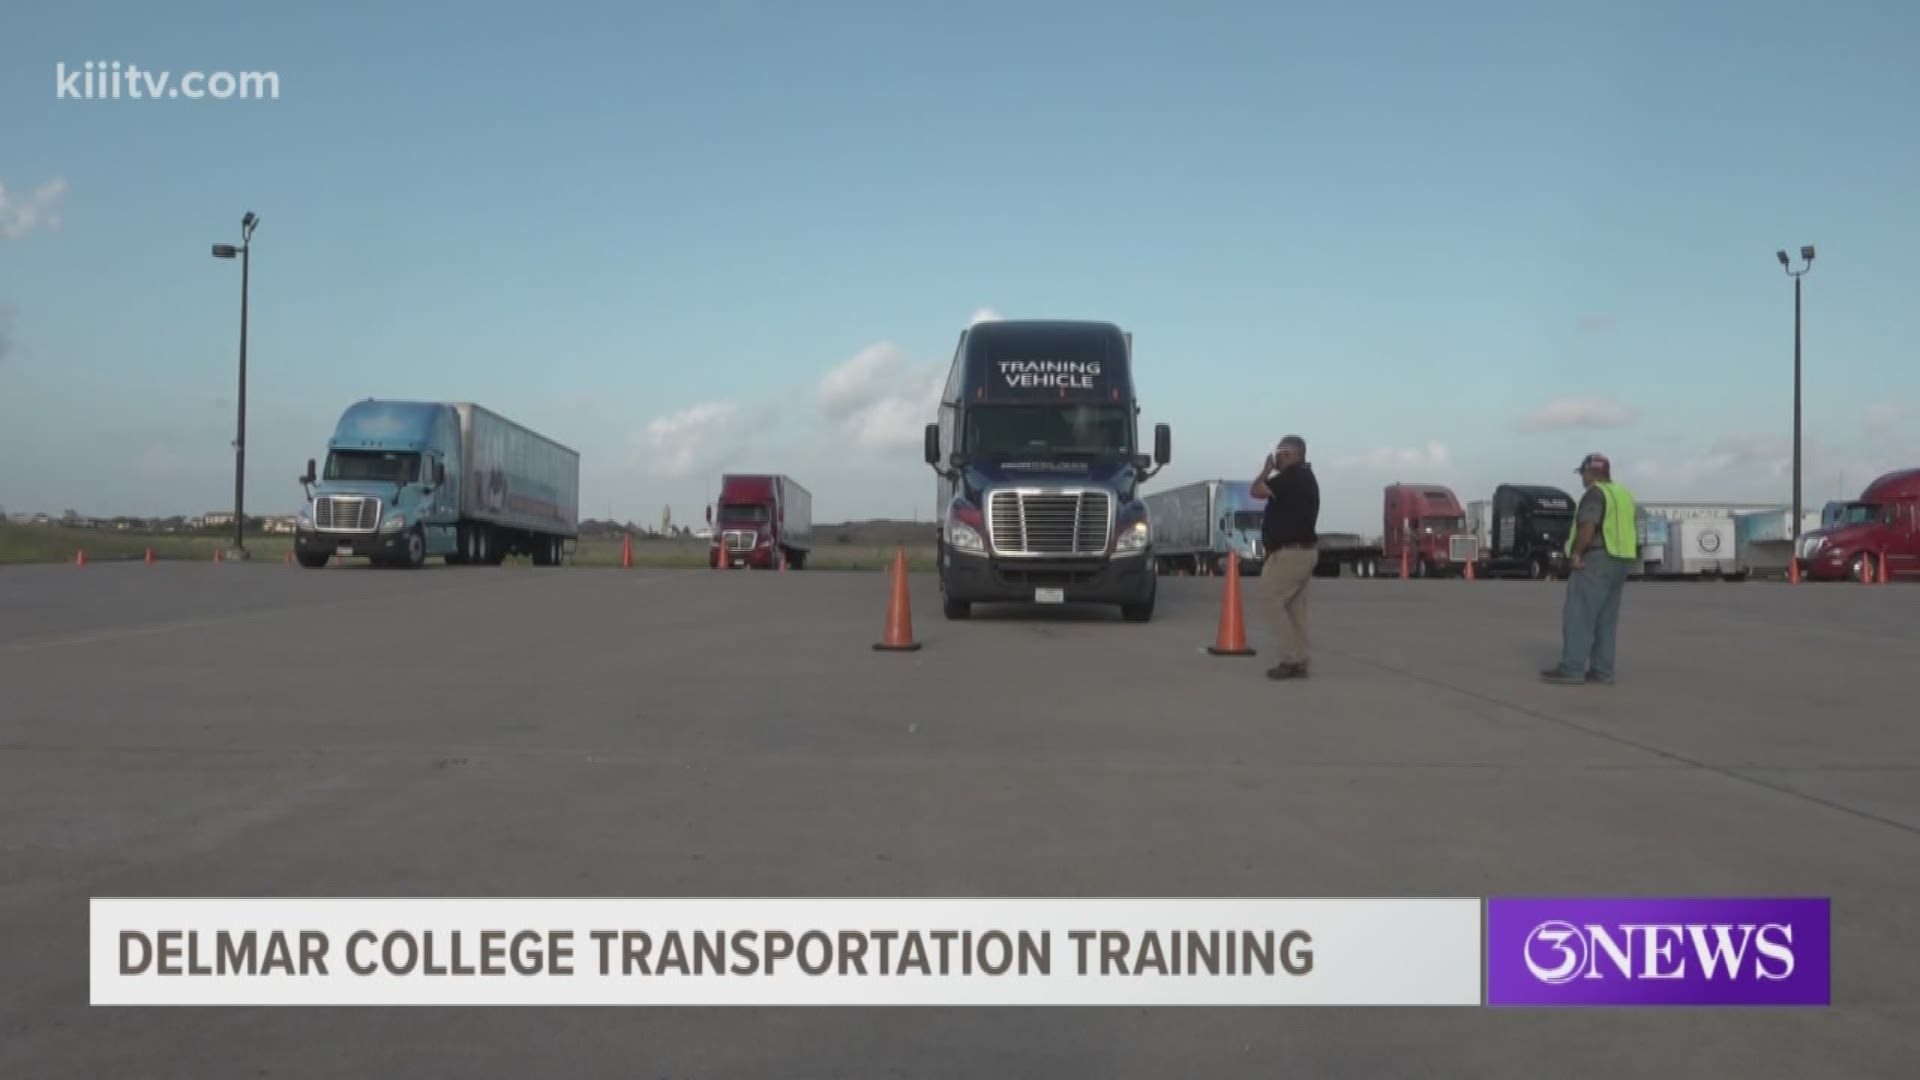 Del Mar College says the trucking industry is starving for more drivers right now, and the best place to get your license is on their campus.